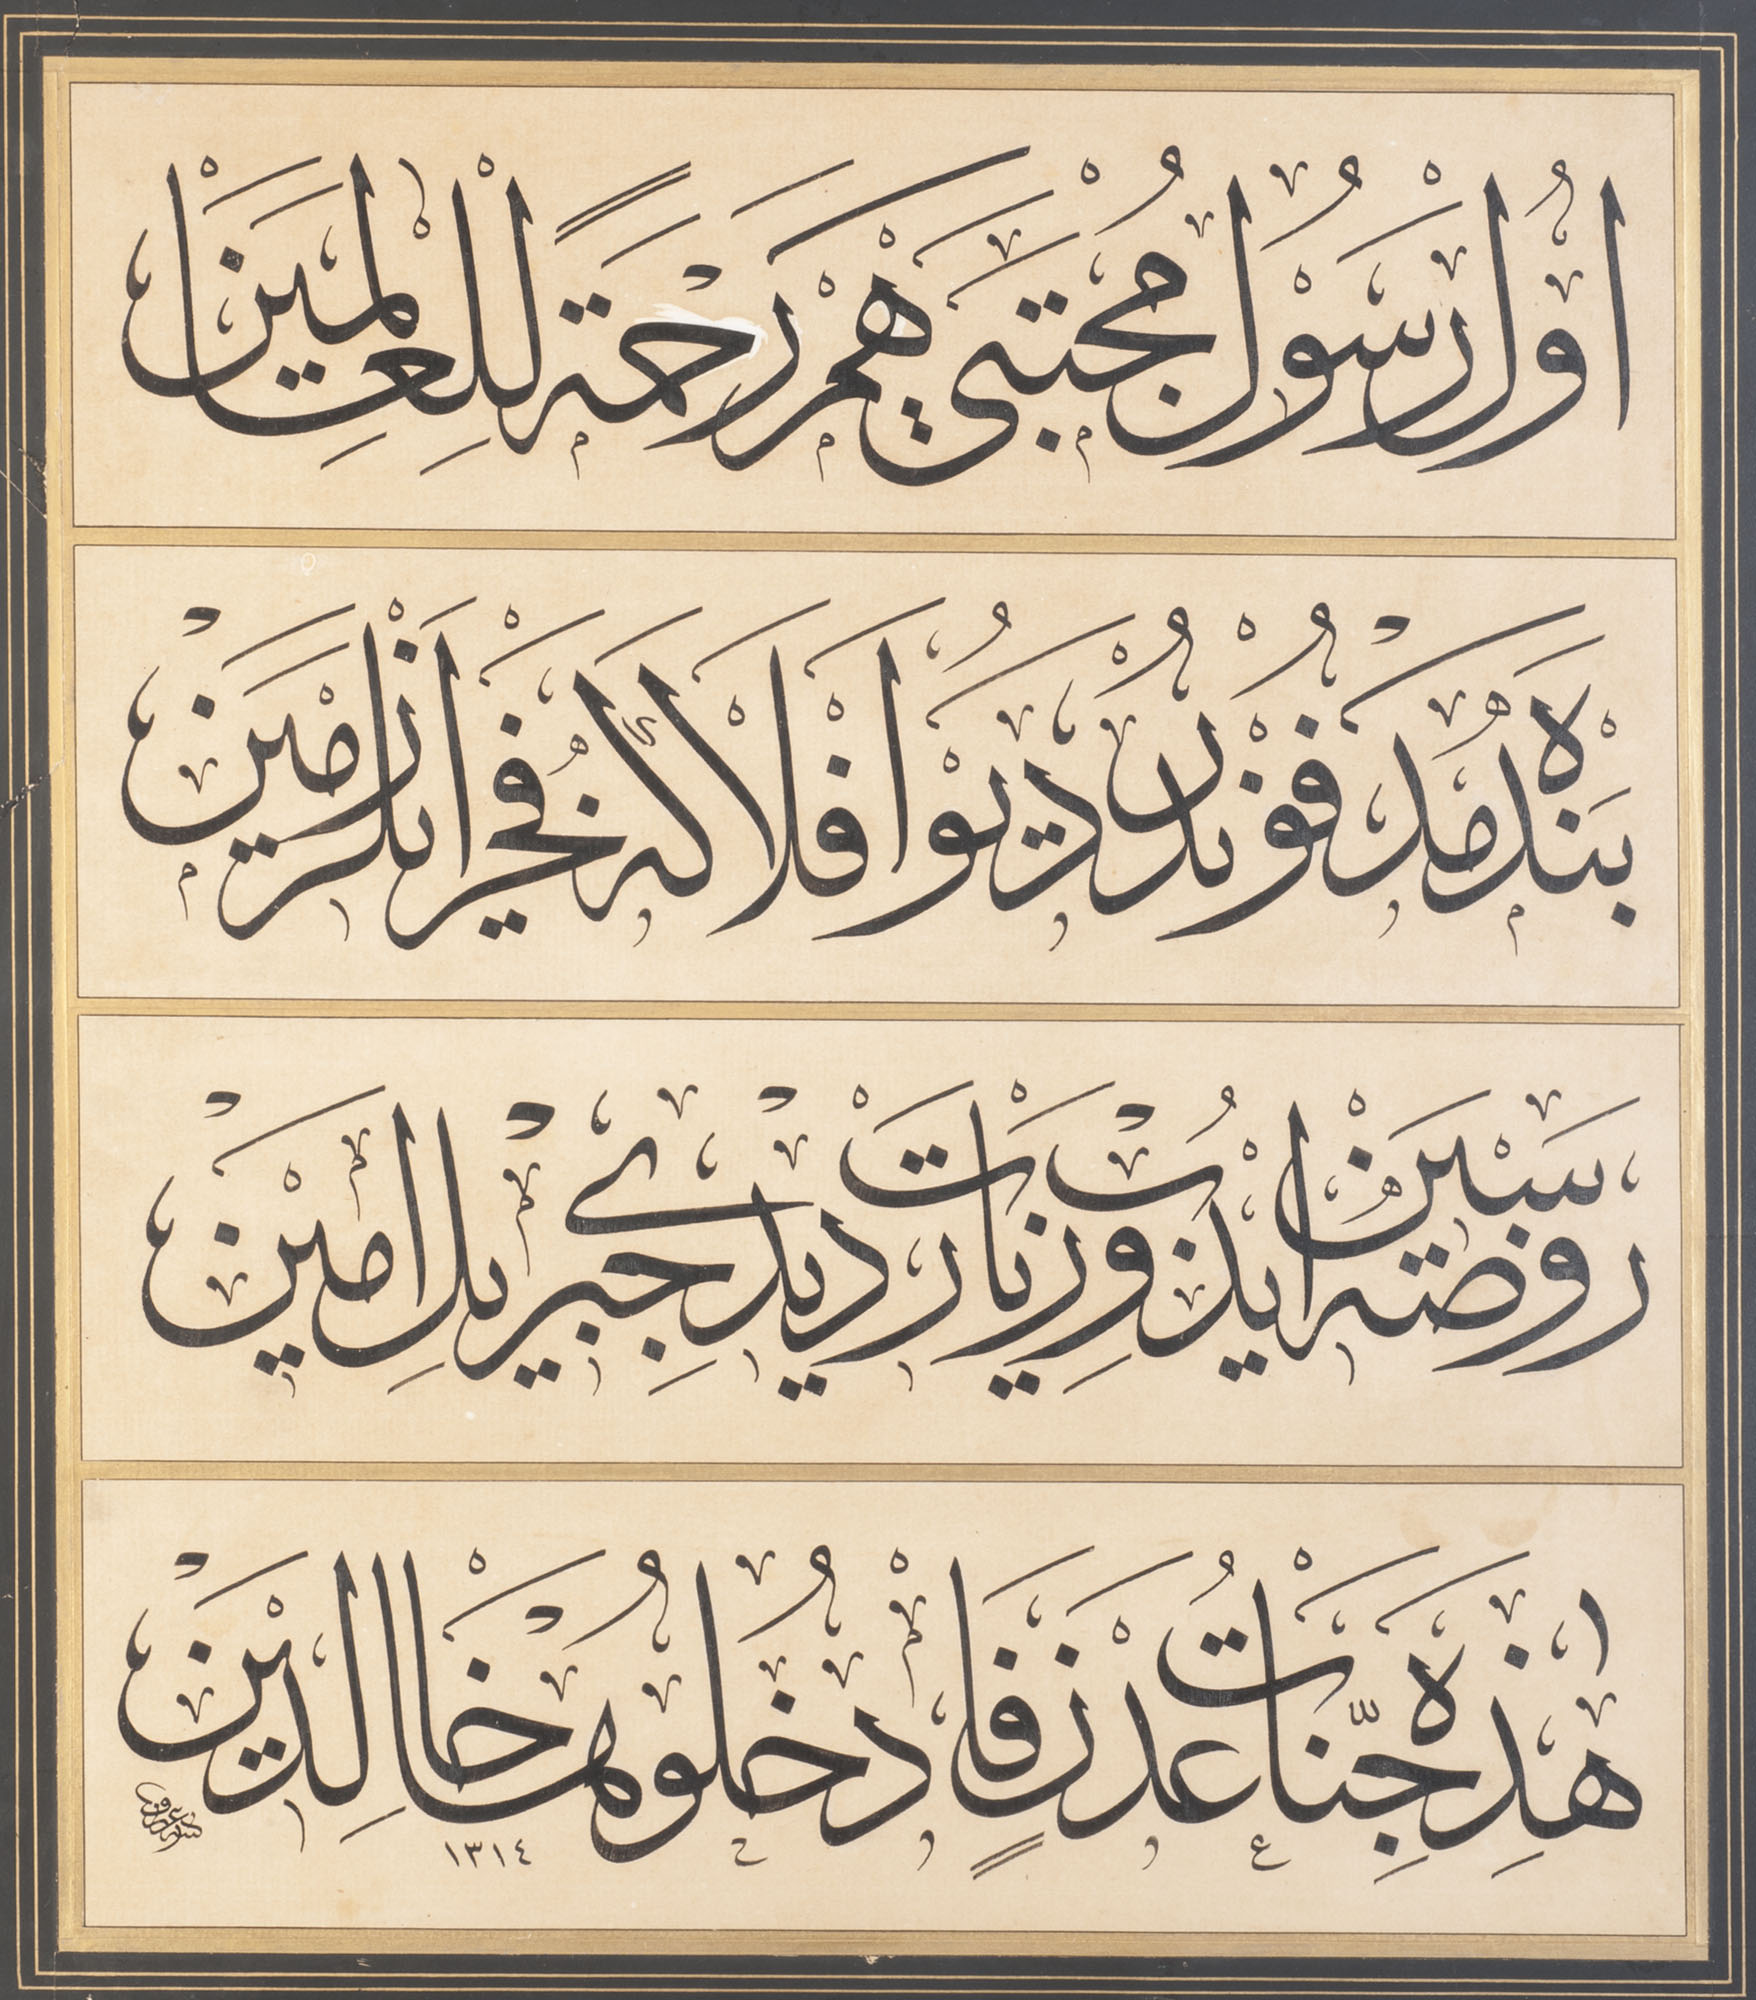 Calligraphic panel about the tomb of Prophet Muhammad